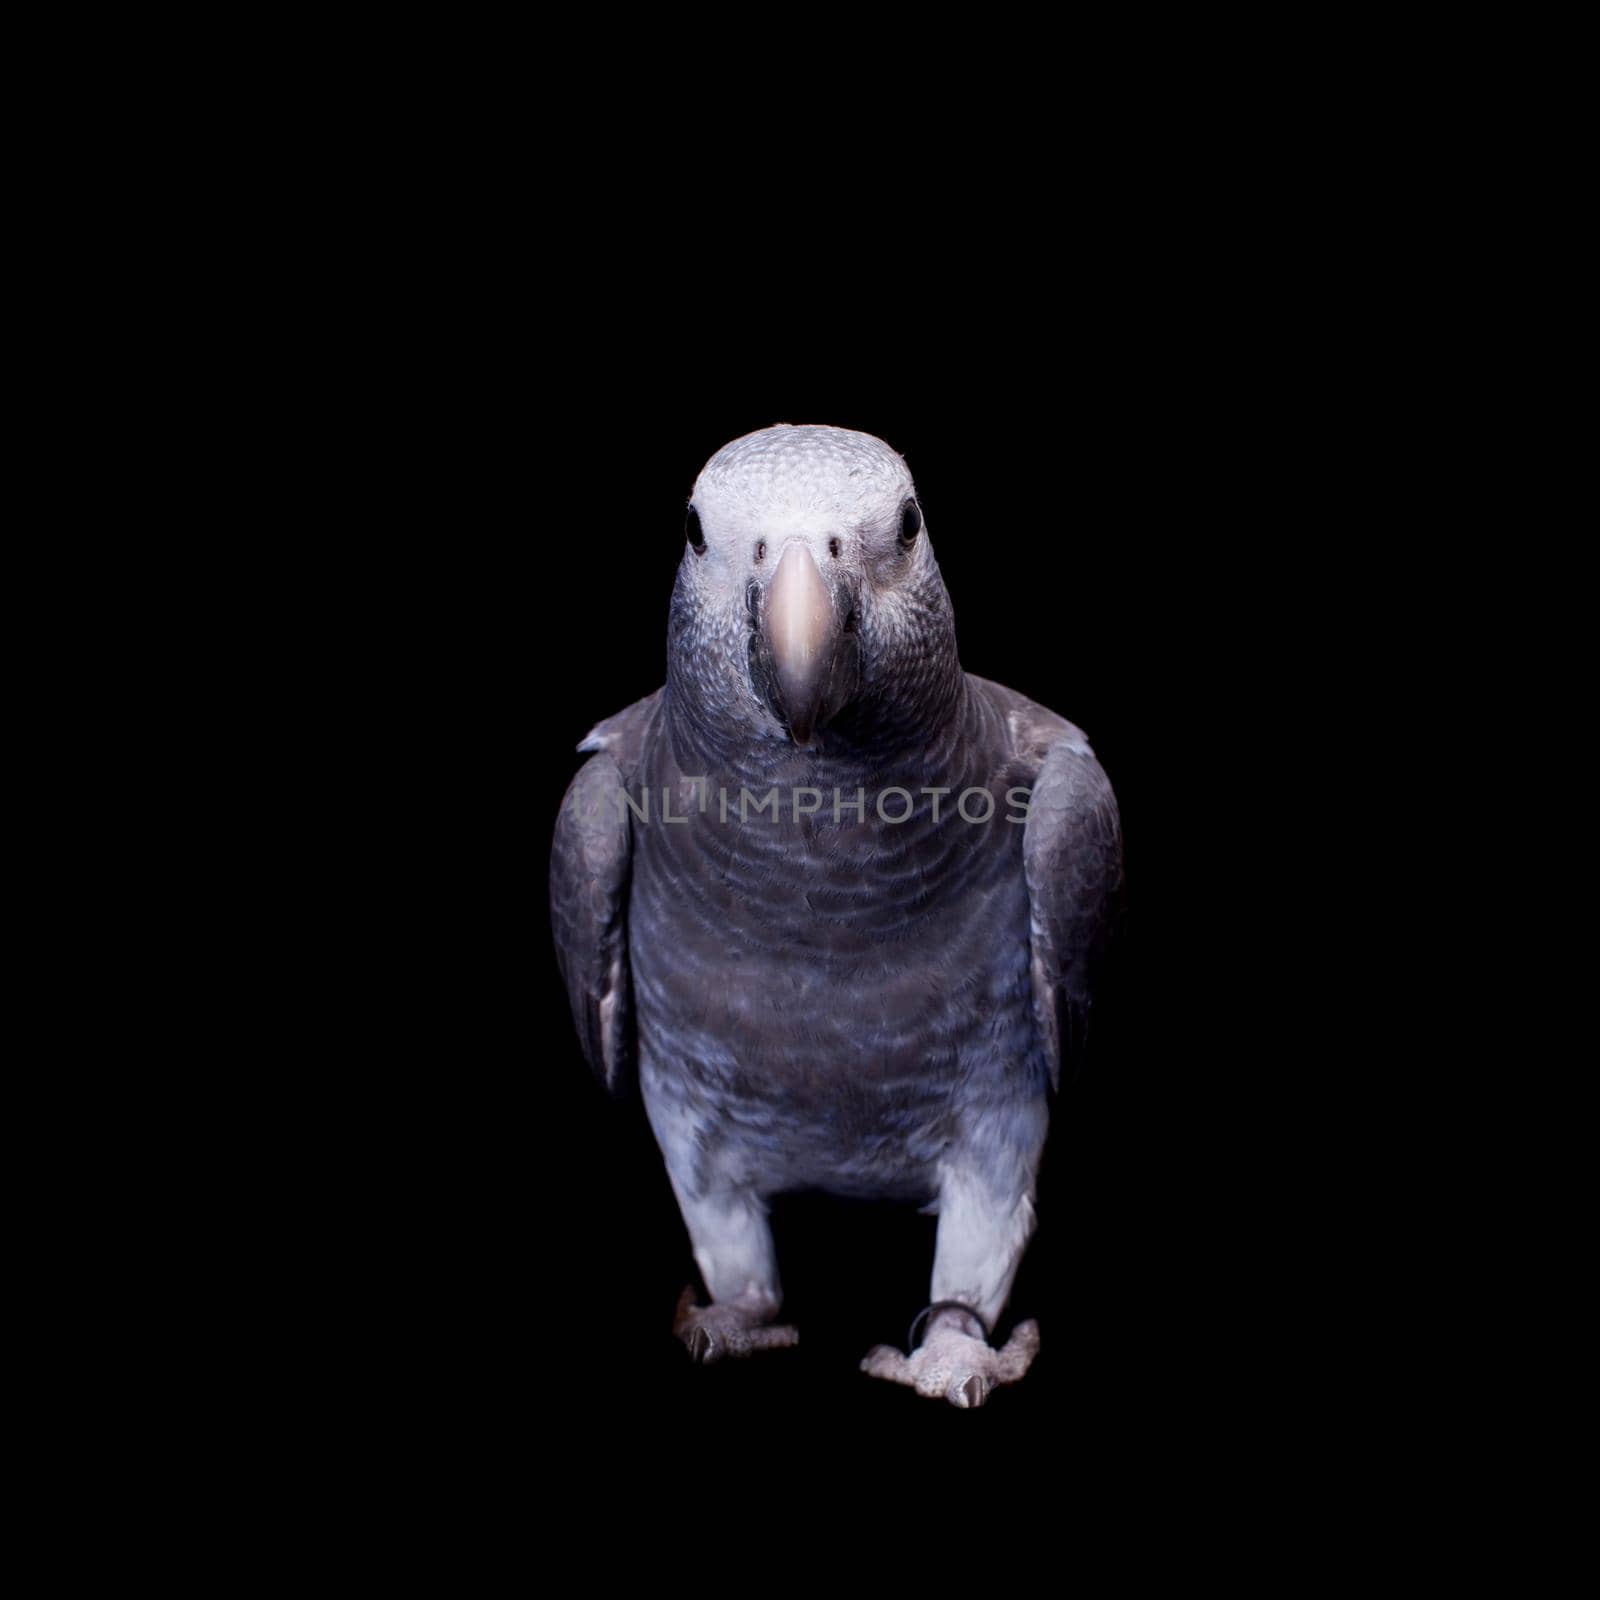 African Grey Parrot, Psittacus erithacus timneh, isolated on black background